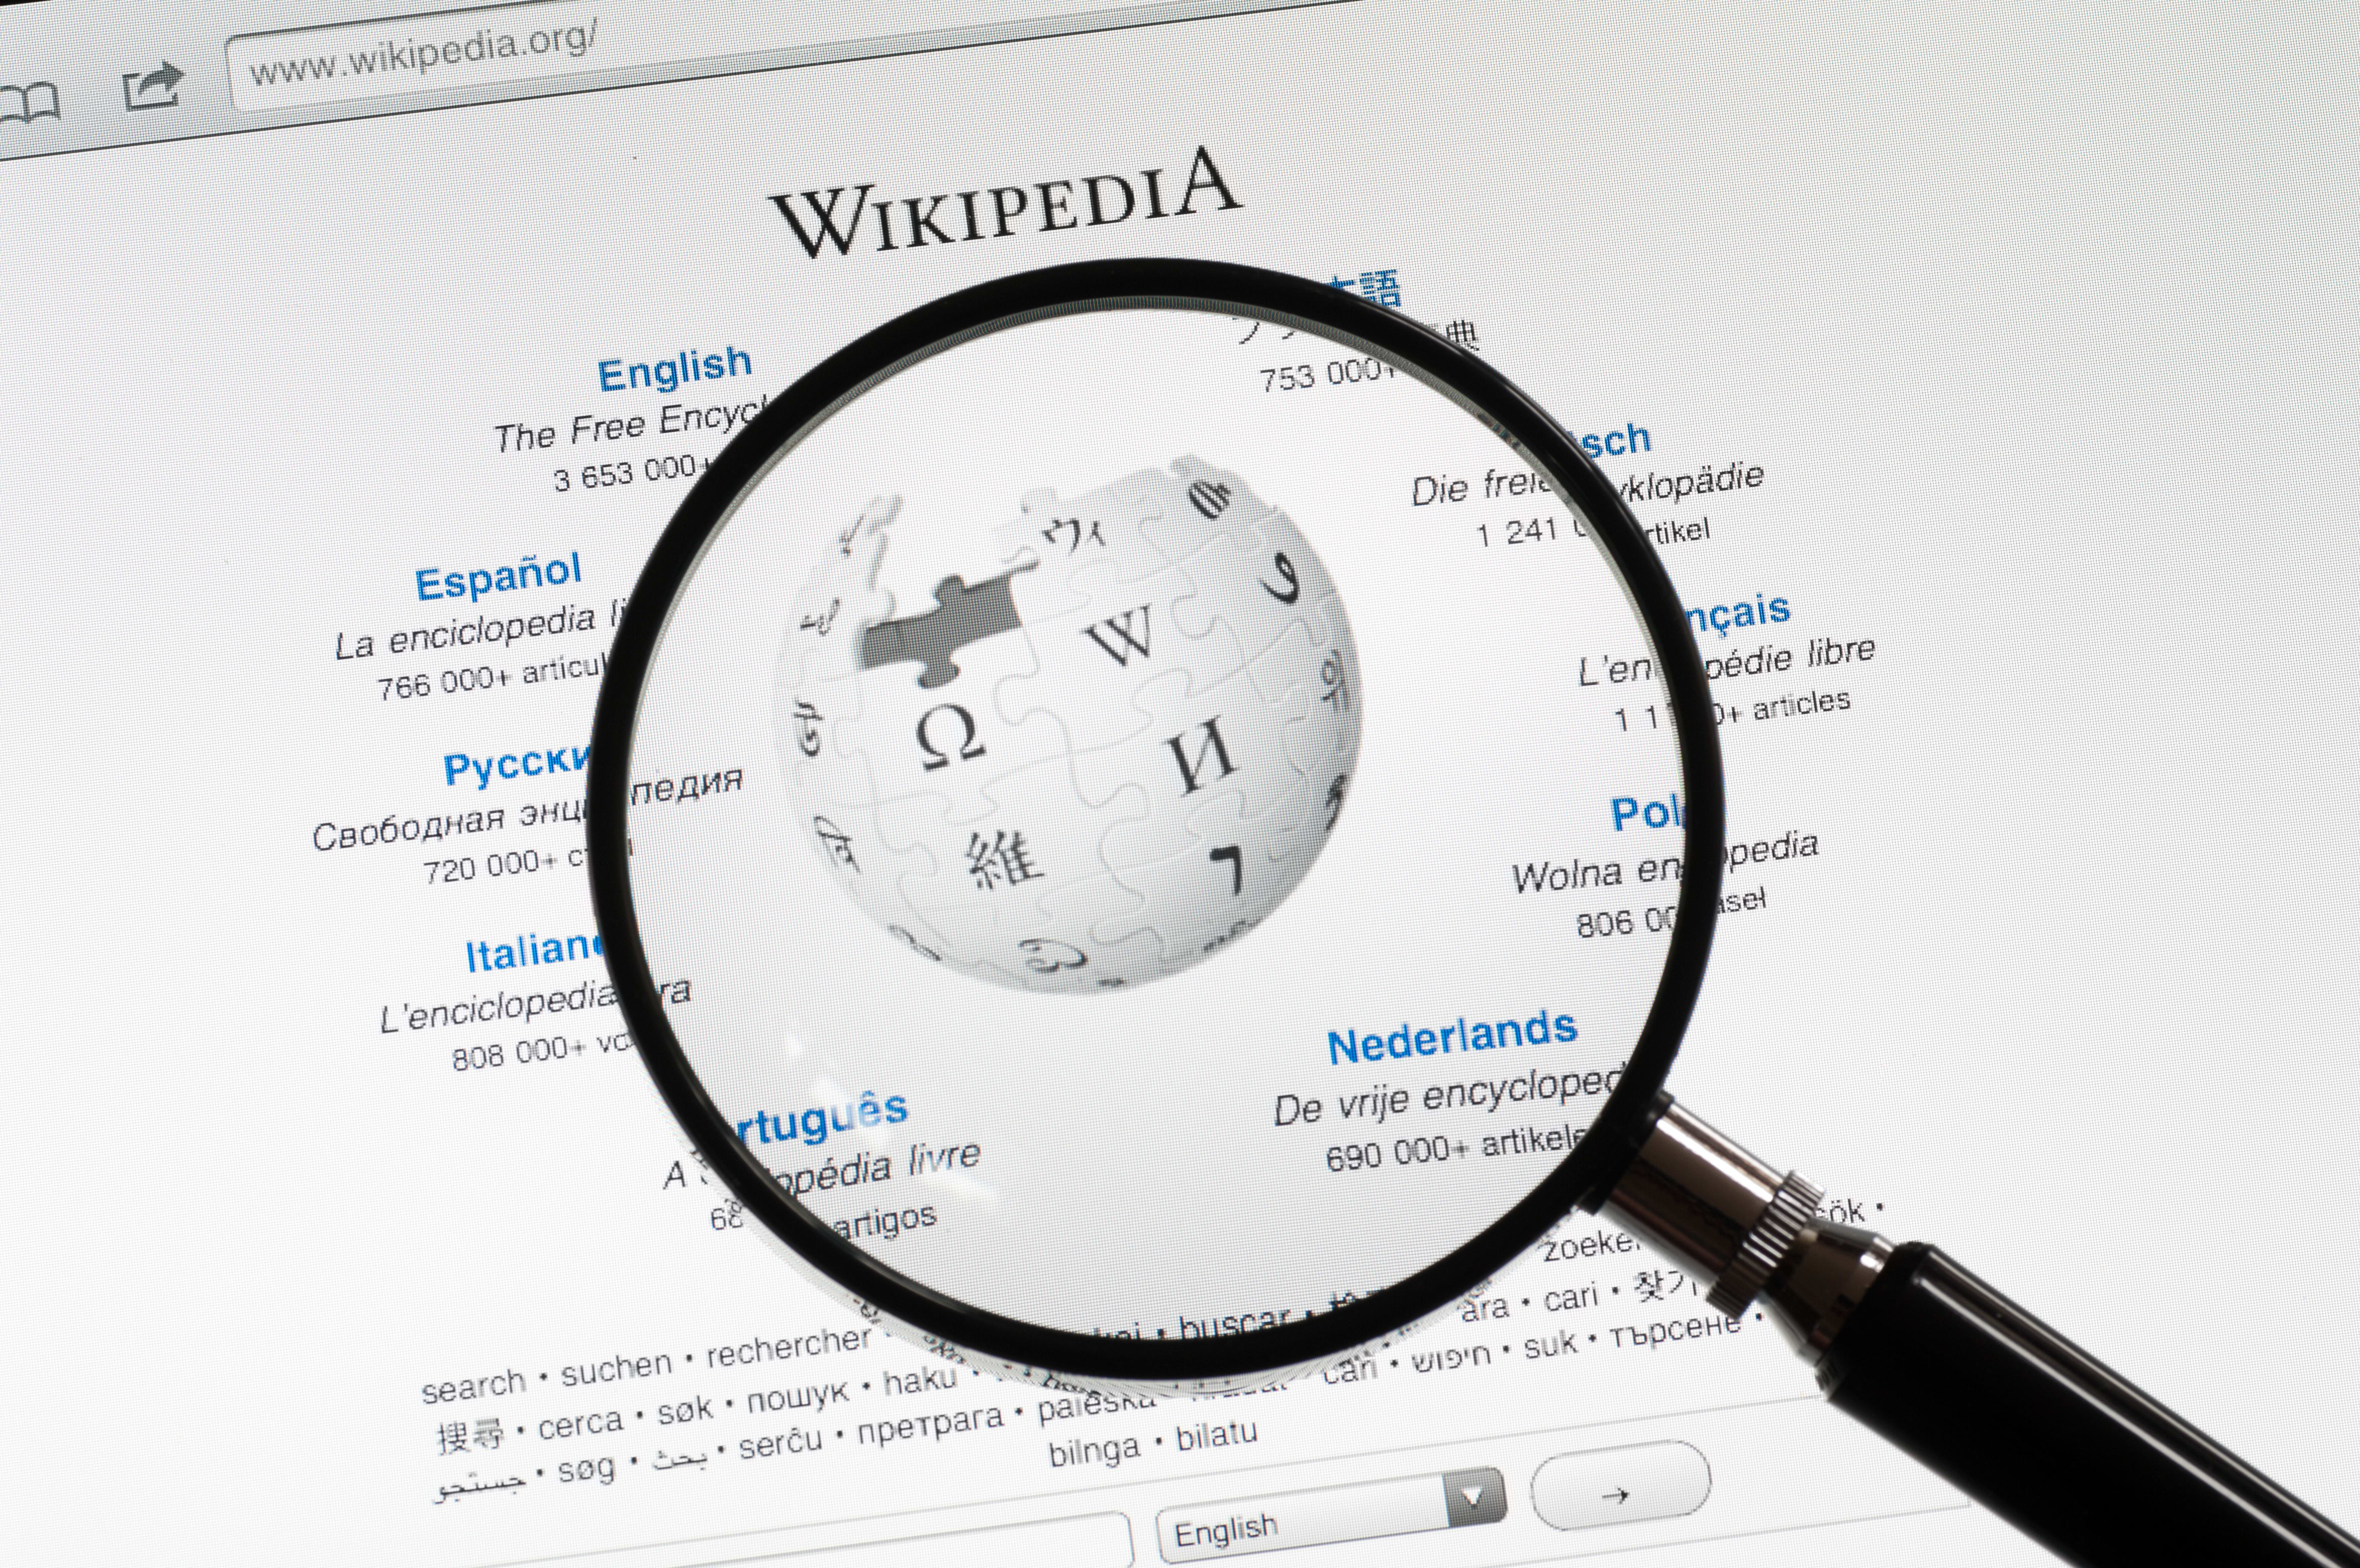 5 Questions You Generally Ask about Wikipedia